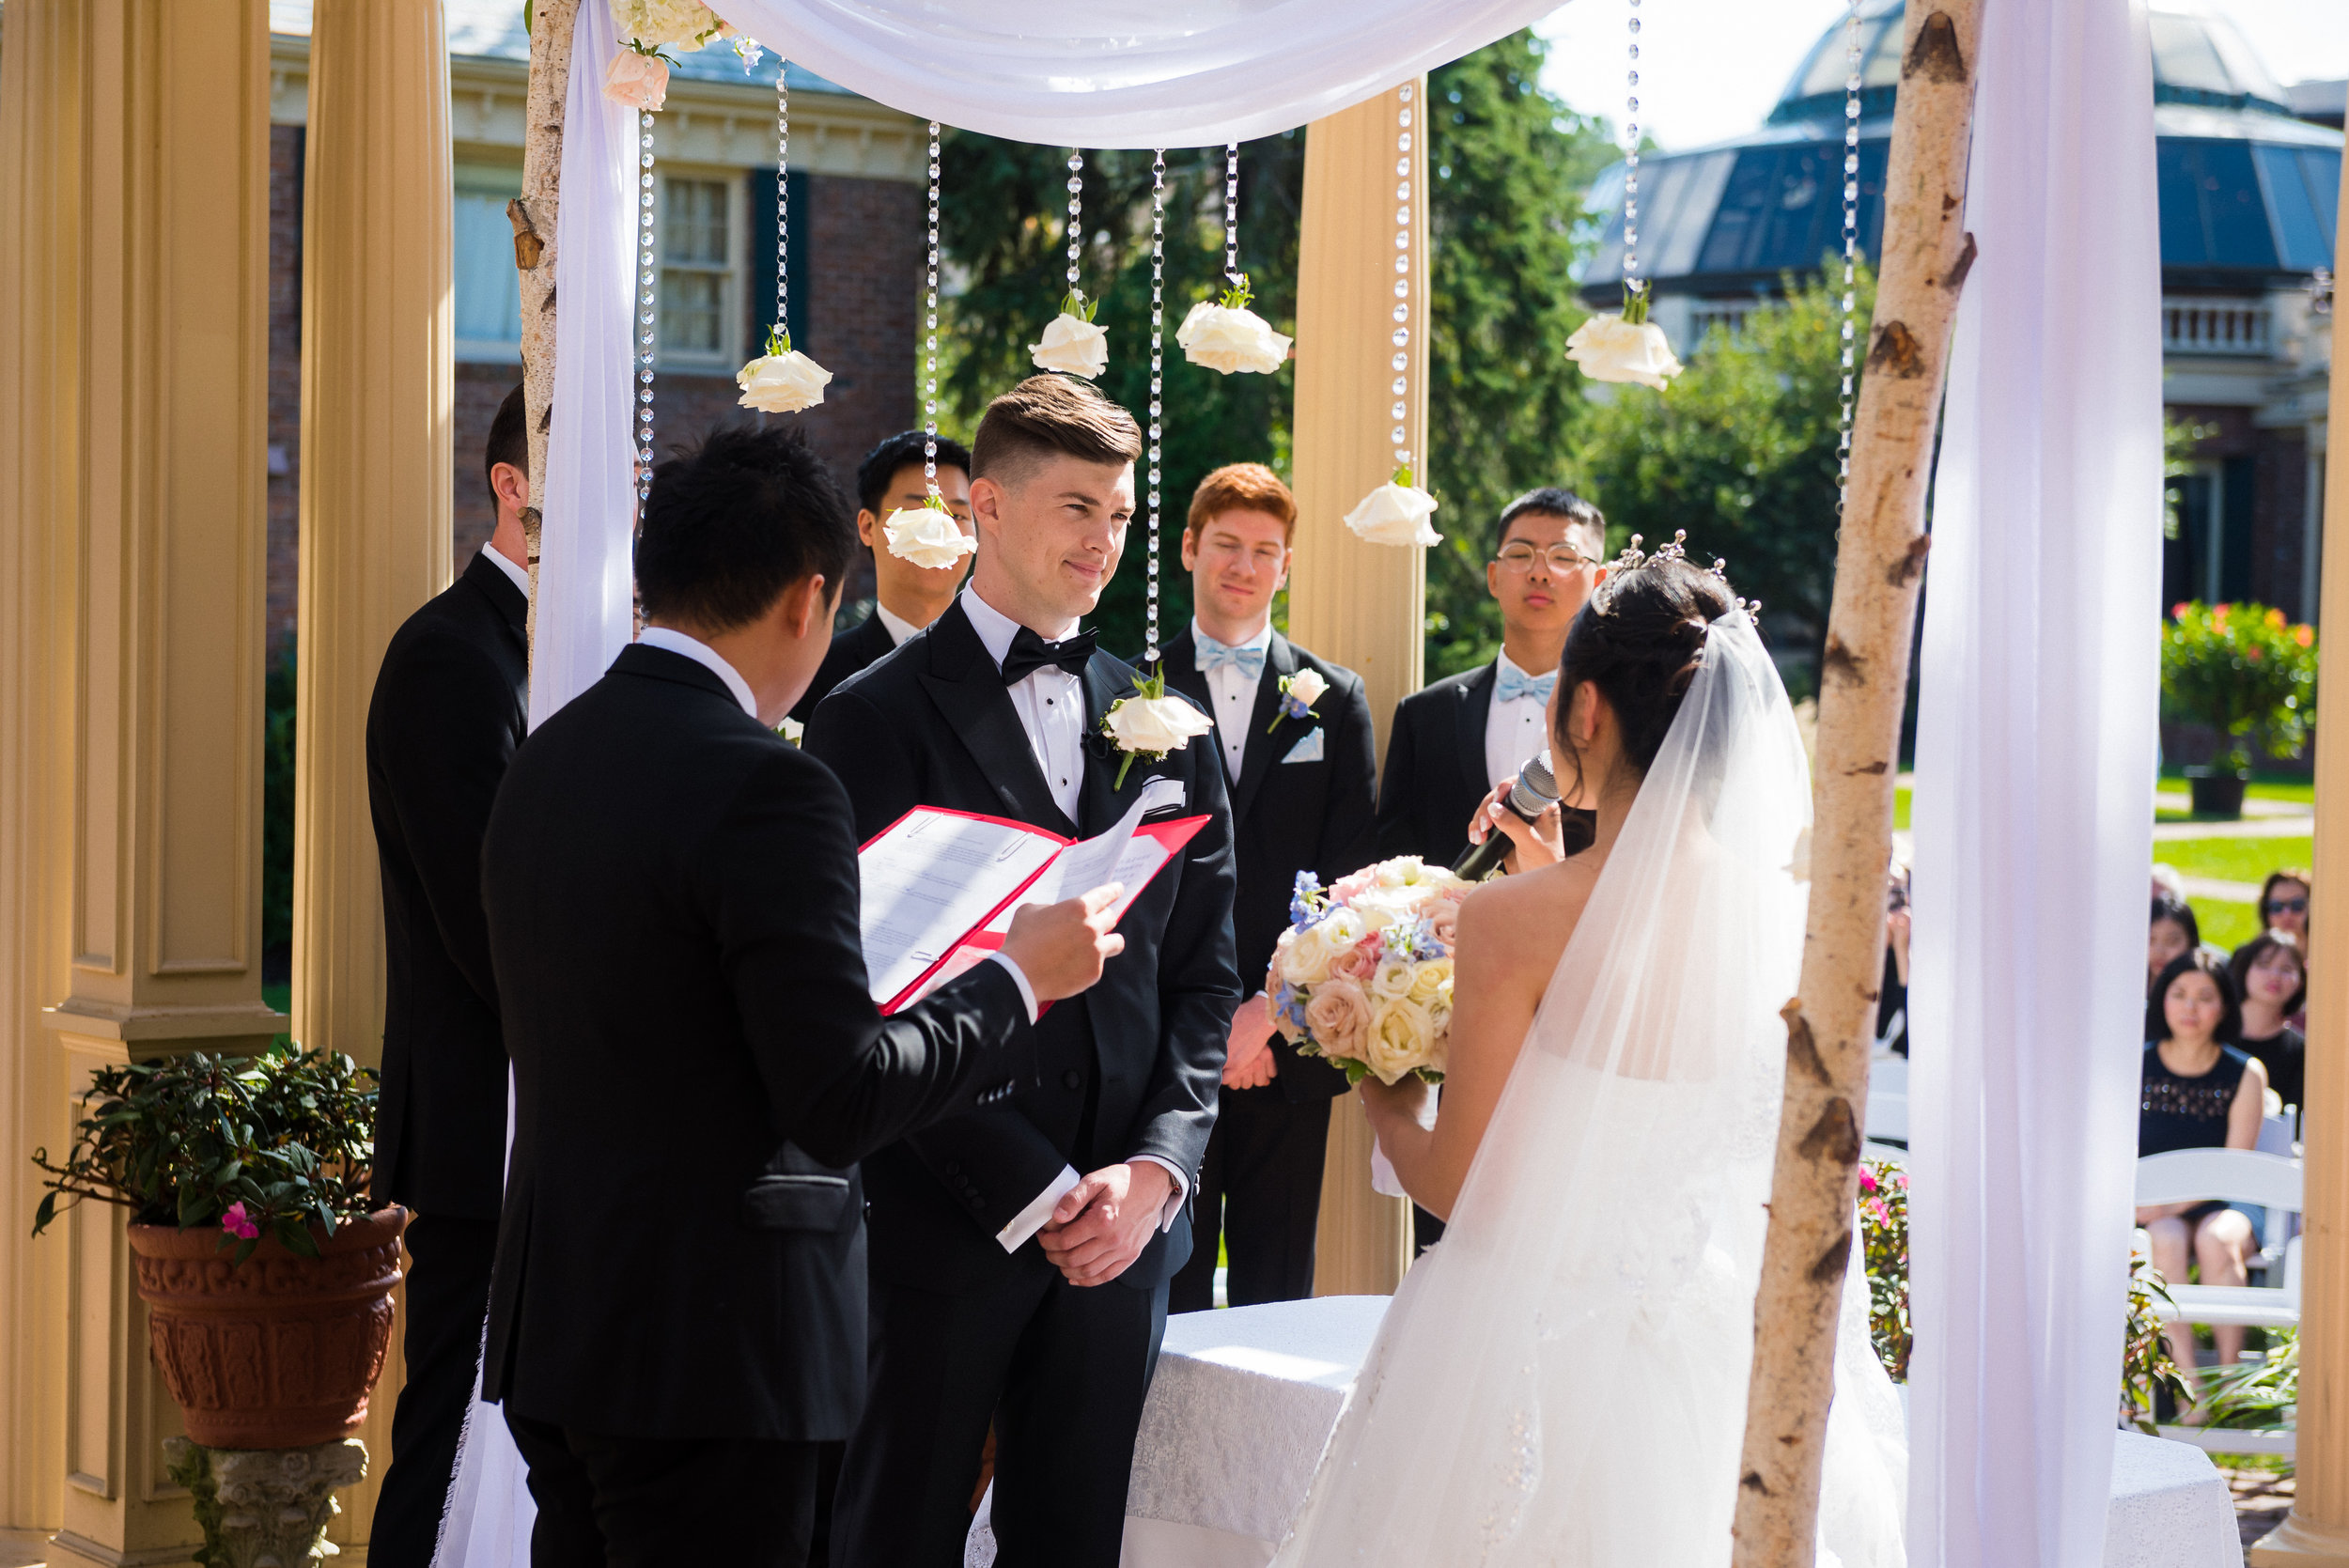  ping and brent both had their own vows during their ceremony. i like the view from behind because you get to see their friends and family in the background watch this new jersey wedding in west orange at the manor. 